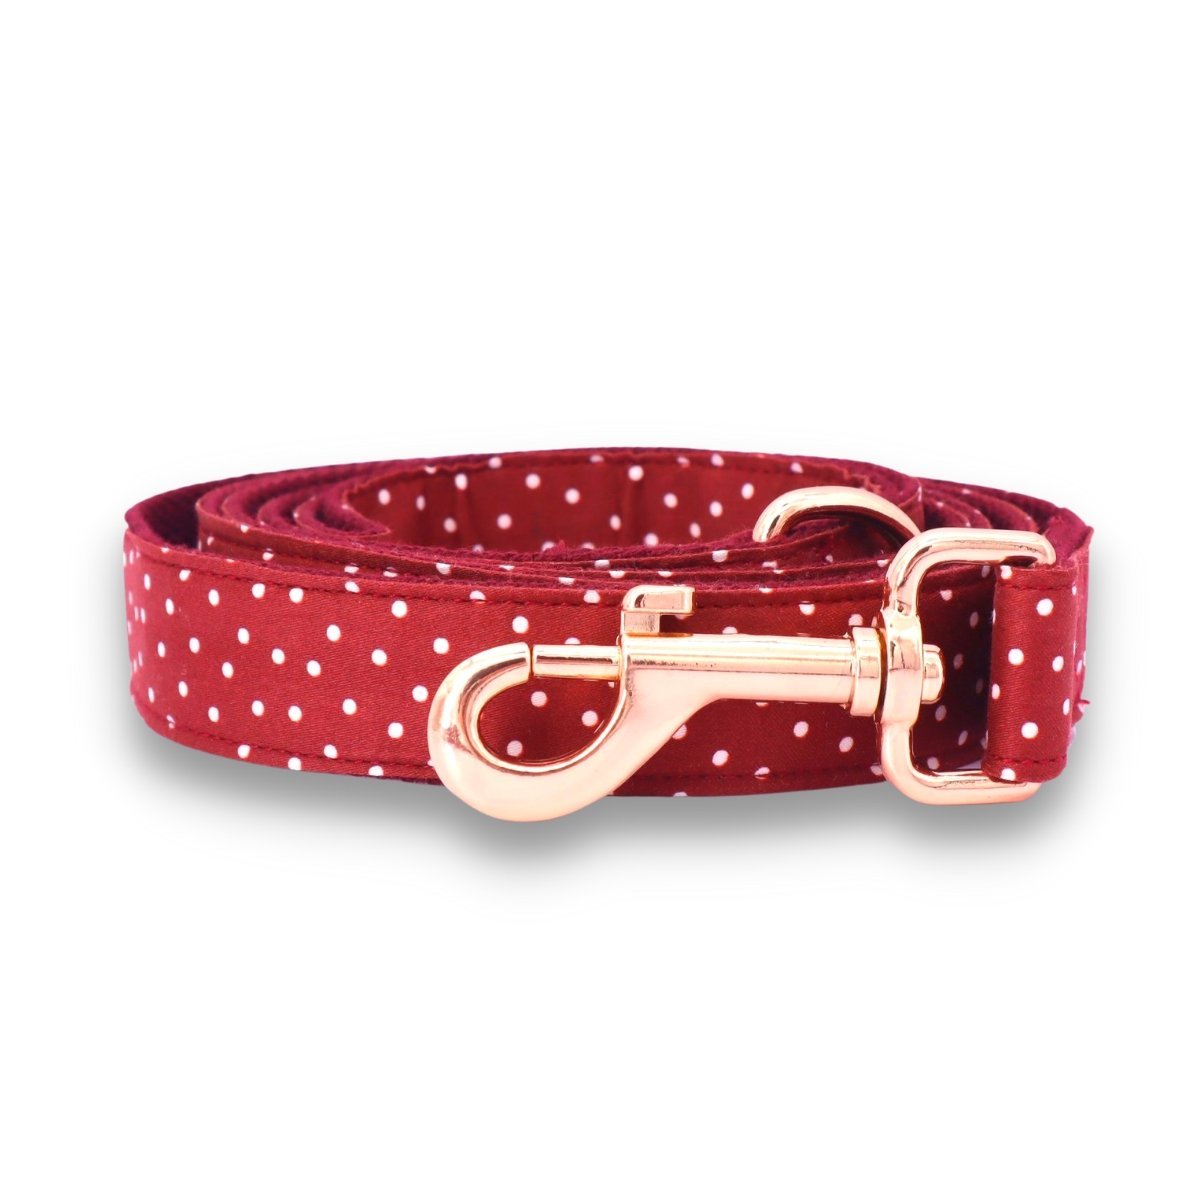 Red Polka Dot leashes for dogs - dog leash for walking - dog leash canada